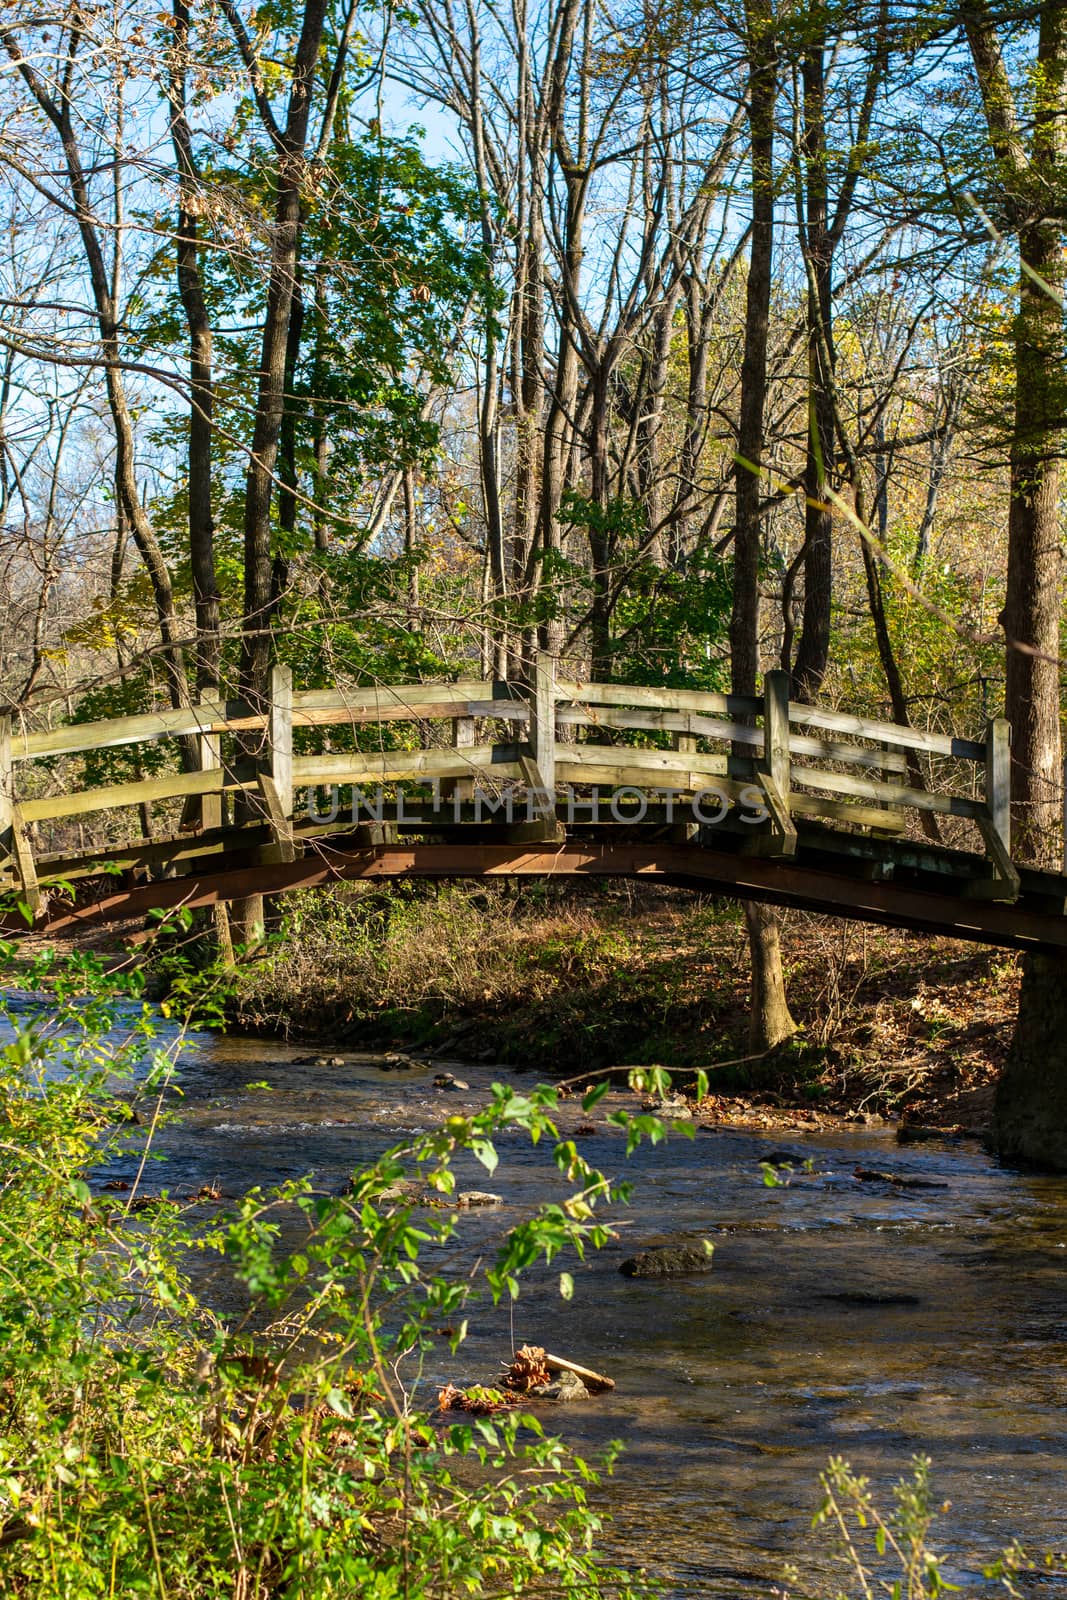 A Wooden Bridge Going Over a Small Stream on a Clear Autumn Day by bju12290